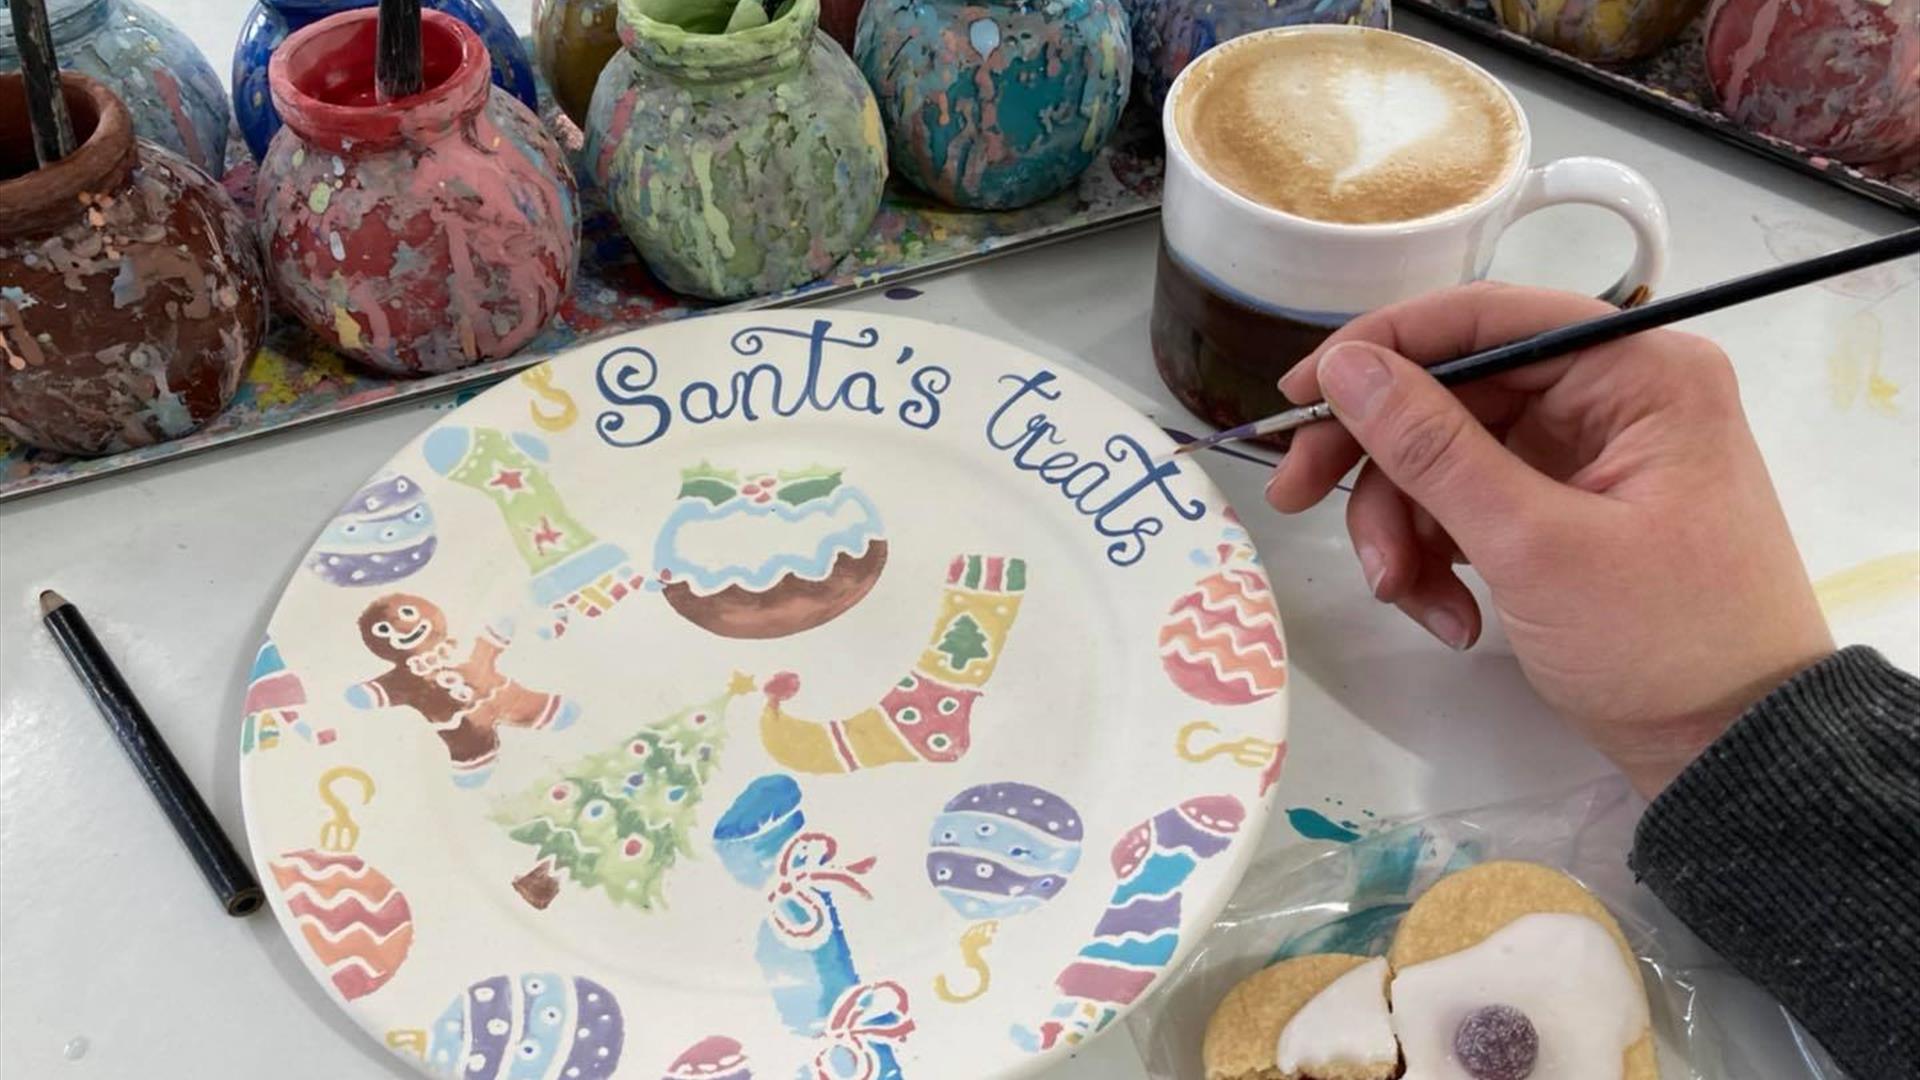 A hand sponged side plate with Santa's Treats written on it, an arm holding a paint brush, a mug of coffee, and a half eaten german biscuit